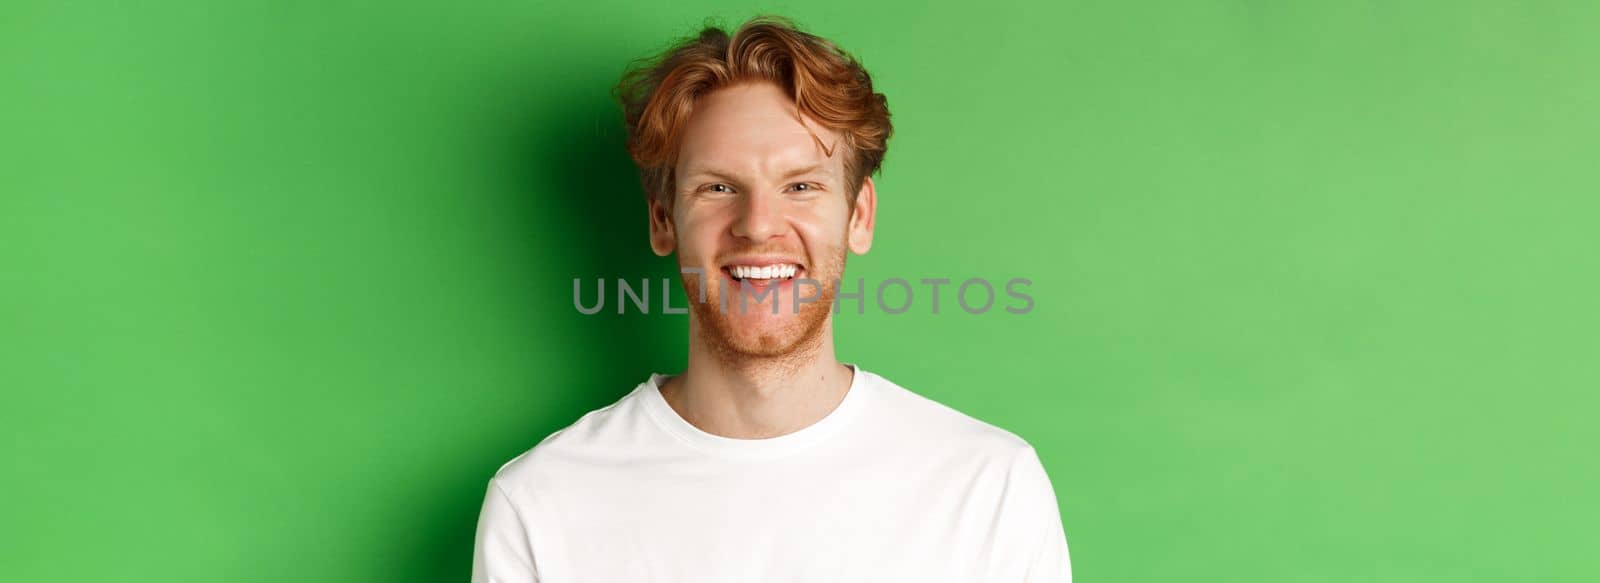 Emotions and fashion concept. Happy young man with red hair and beard, smiling and laughing at camera, standing over green background.